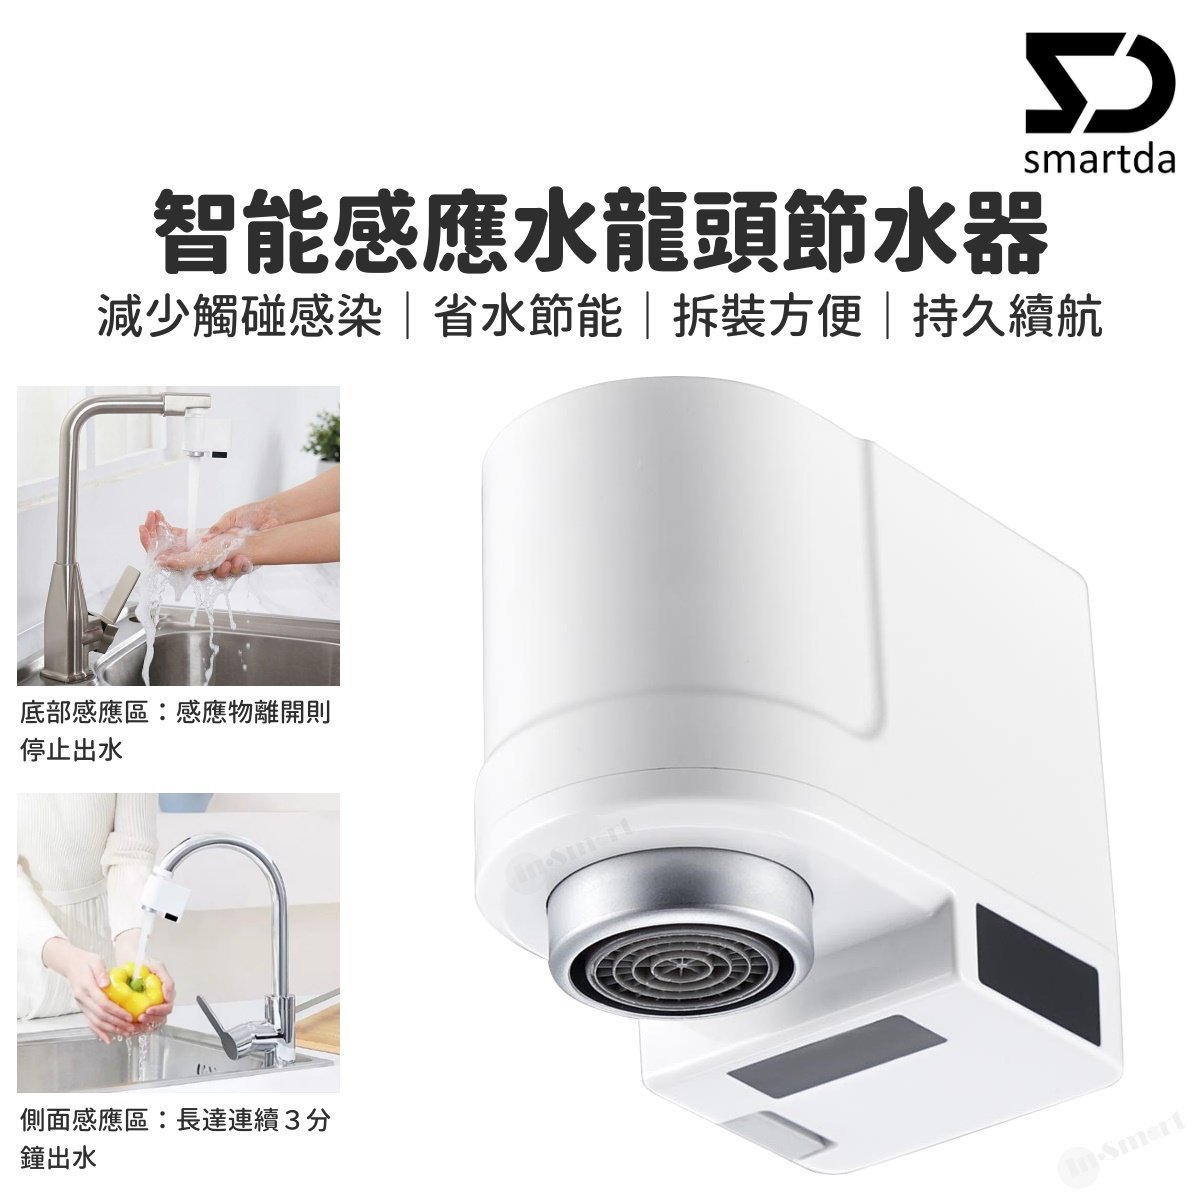 Smart Touchless Automatic Sense Infrared Induction Water Saving Filter International Version